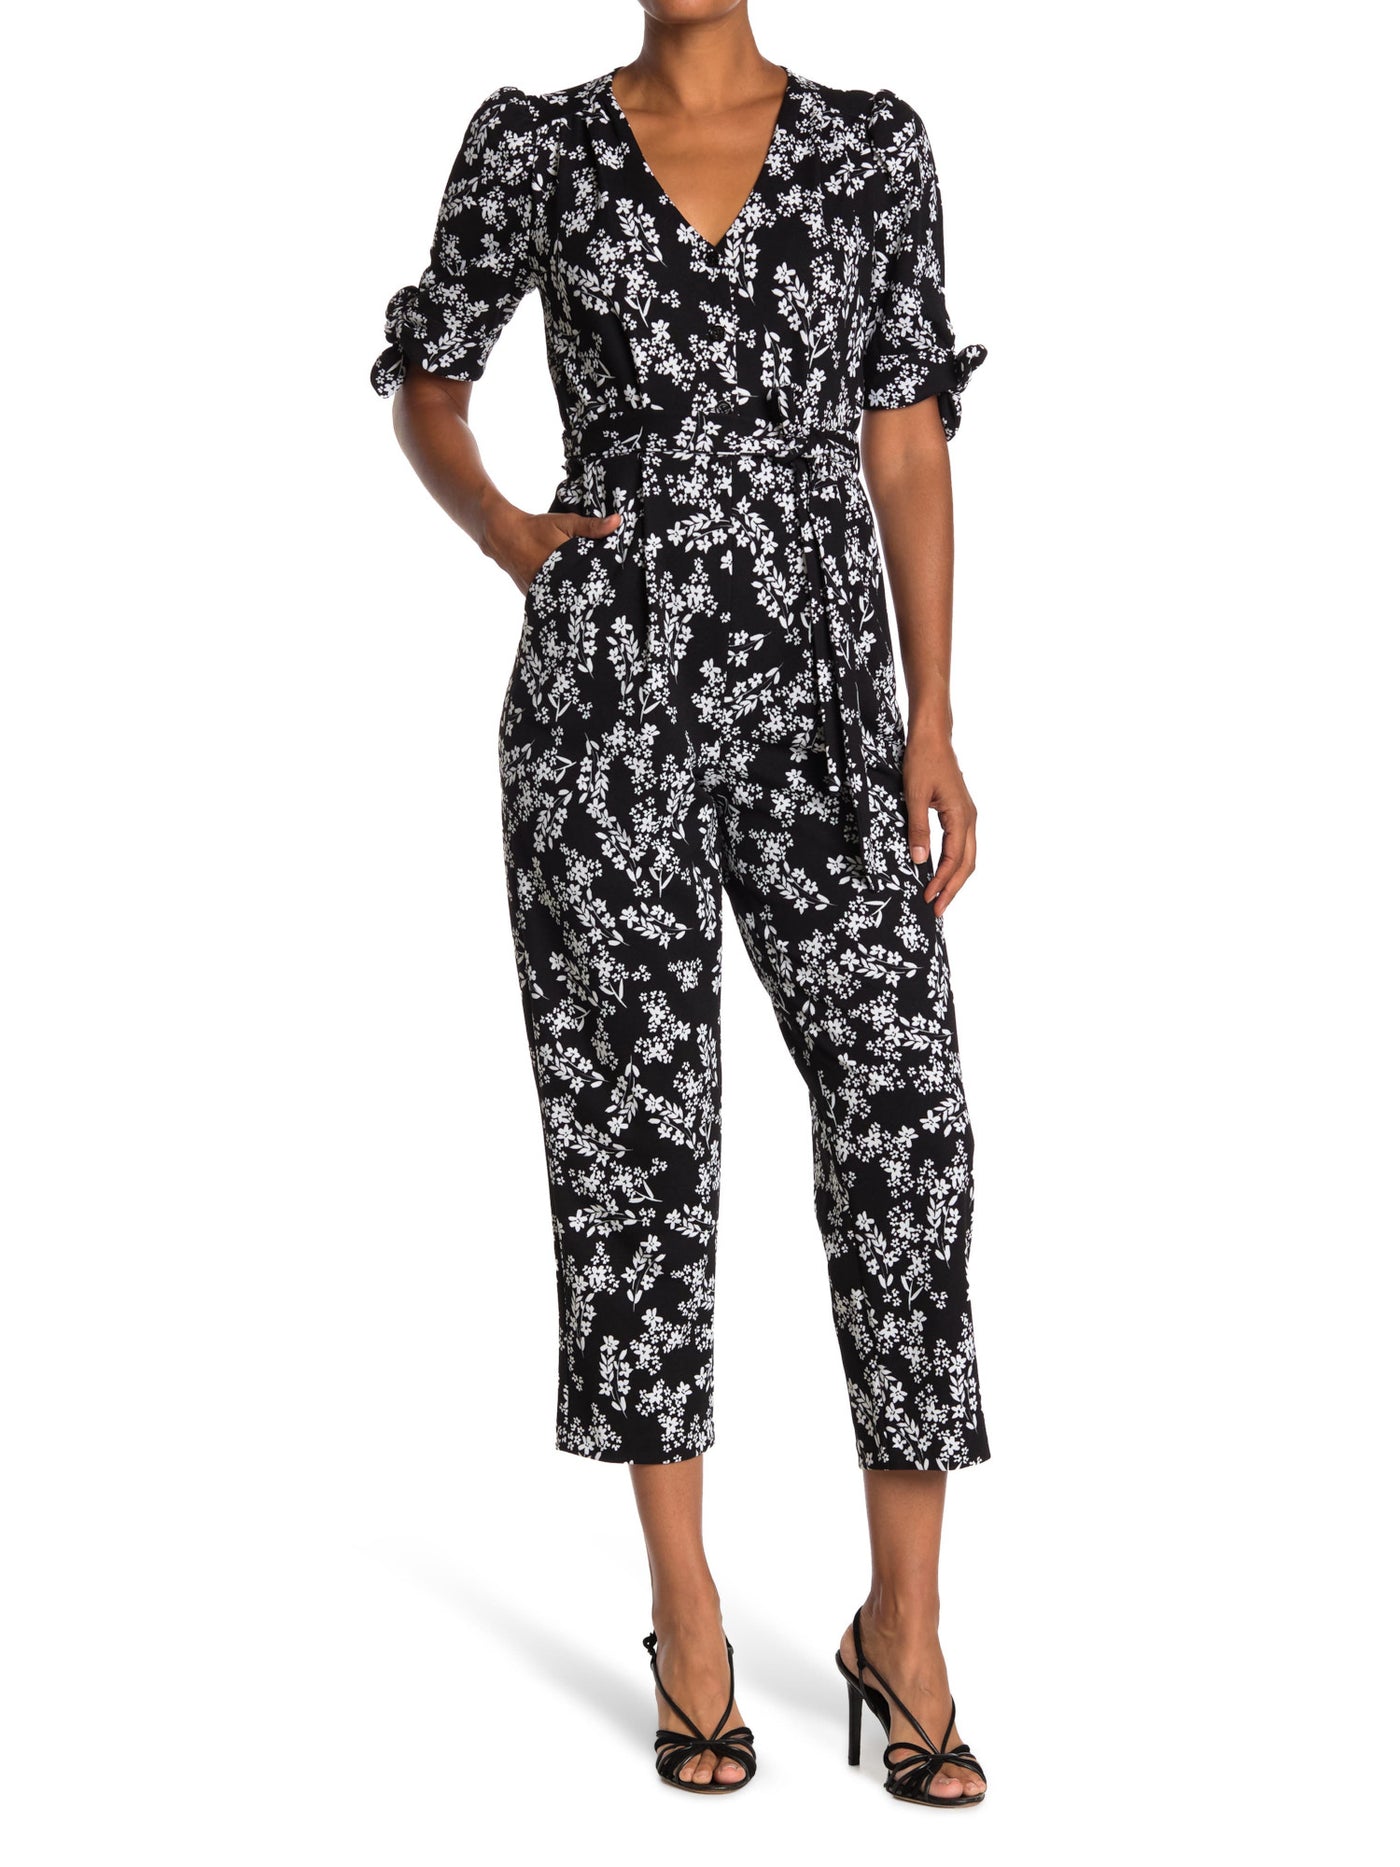 CALVIN KLEIN Womens Black Stretch Pocketed Zippered Tie Floral Elbow Sleeve V Neck Cocktail Straight leg Jumpsuit 8